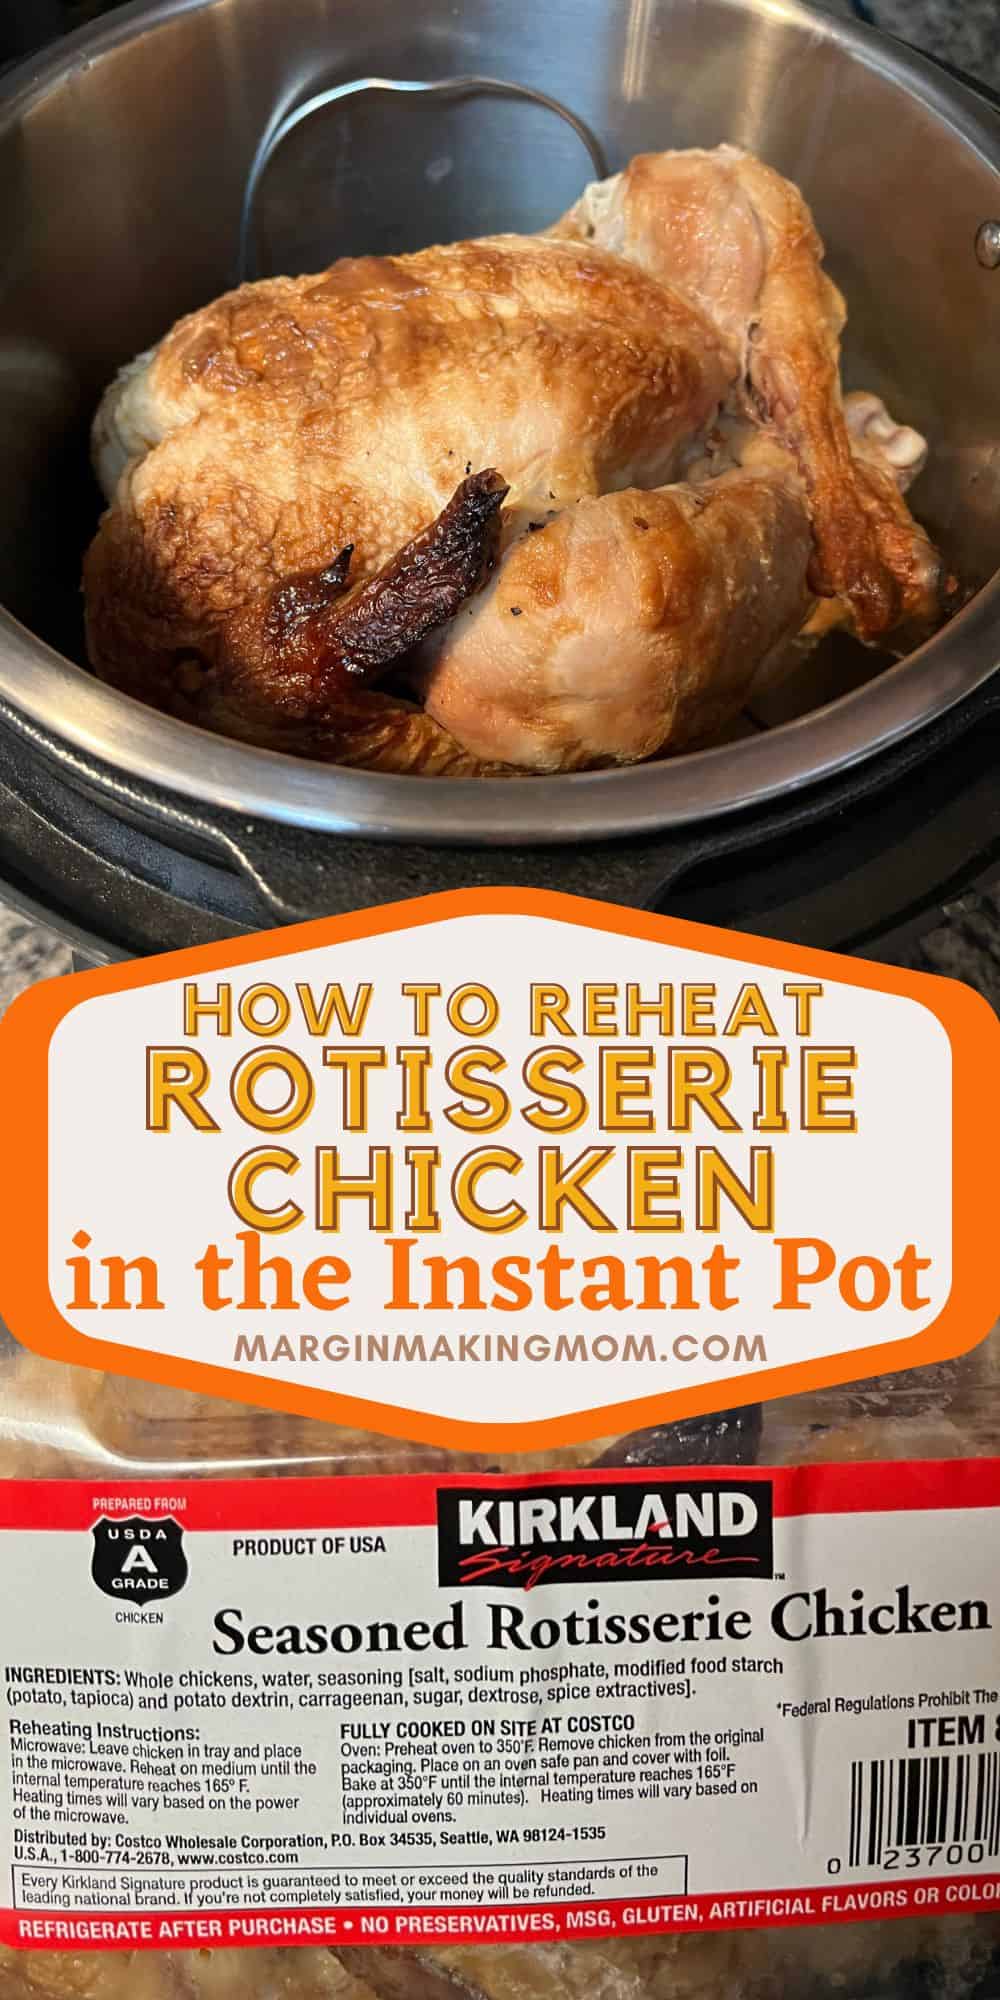 two photos; one shows a rotisserie chicken from Costco still in the package, the other shows the chicken about to be reheated in the Instant Pot